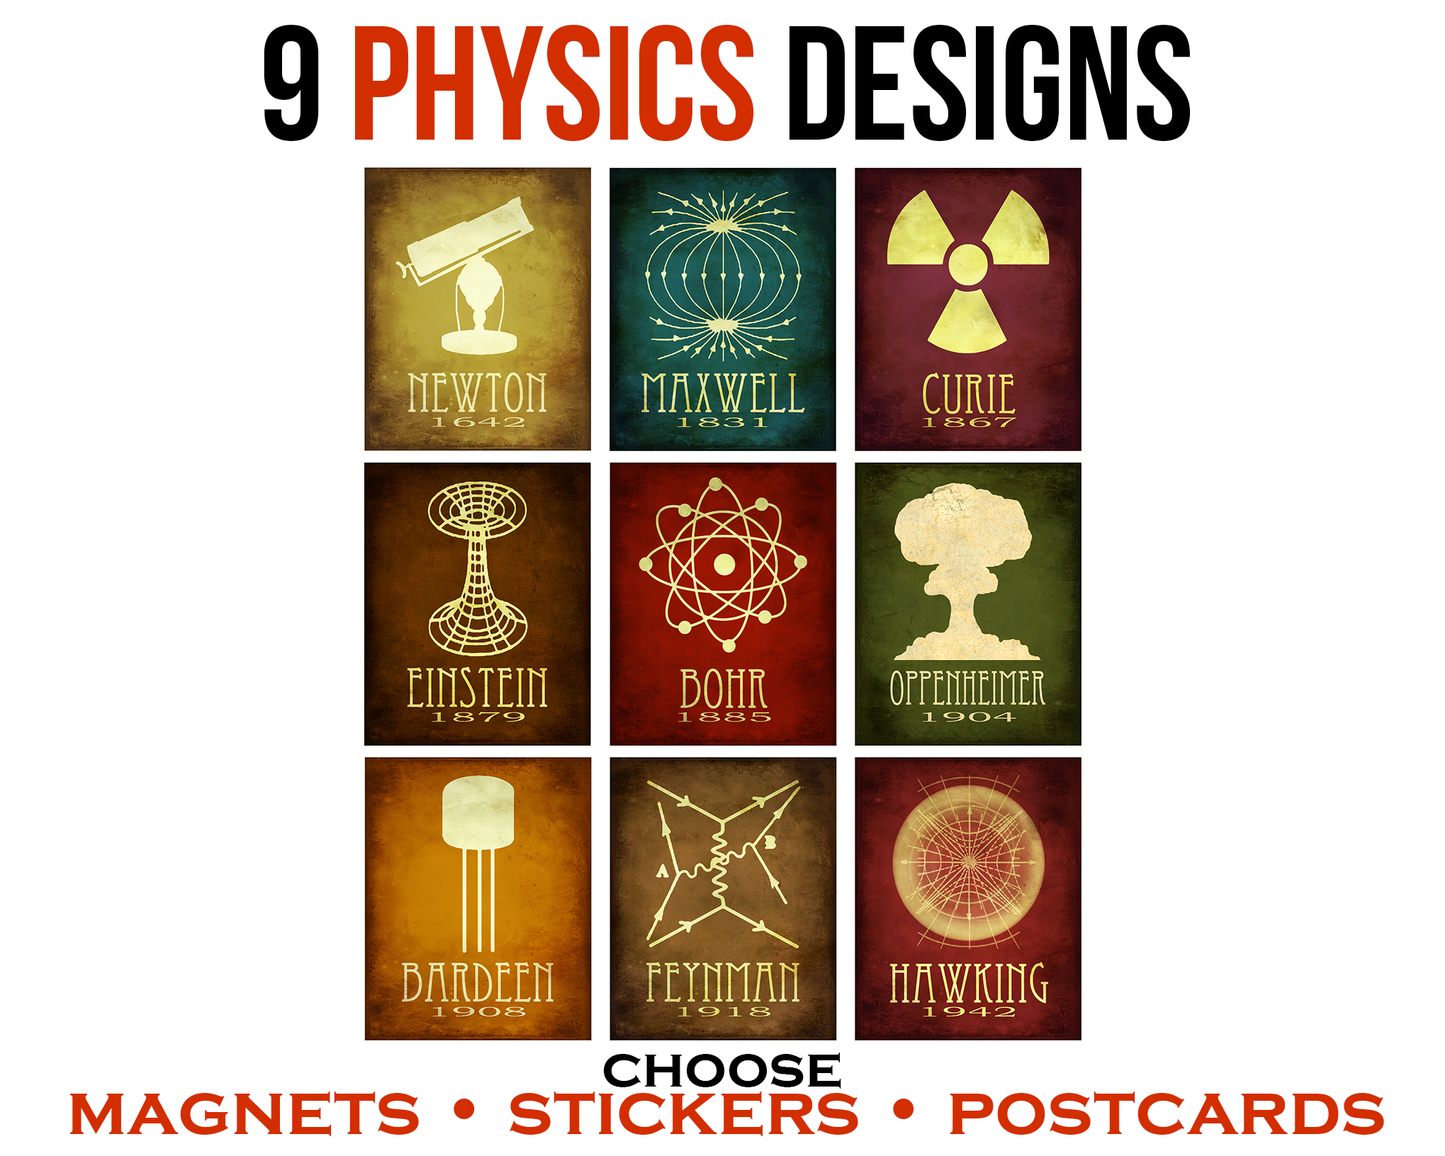 A set of 9 physics designs, available as stickers, postcards, or magnets. Designs include Isaac Newton, James Clerk Maxwell, Marie Curie, Albert Einstein, Niels Bohr, J. Robert Oppenheimer, John Bardeen, Richard Feynman, and Stephen Hawking.